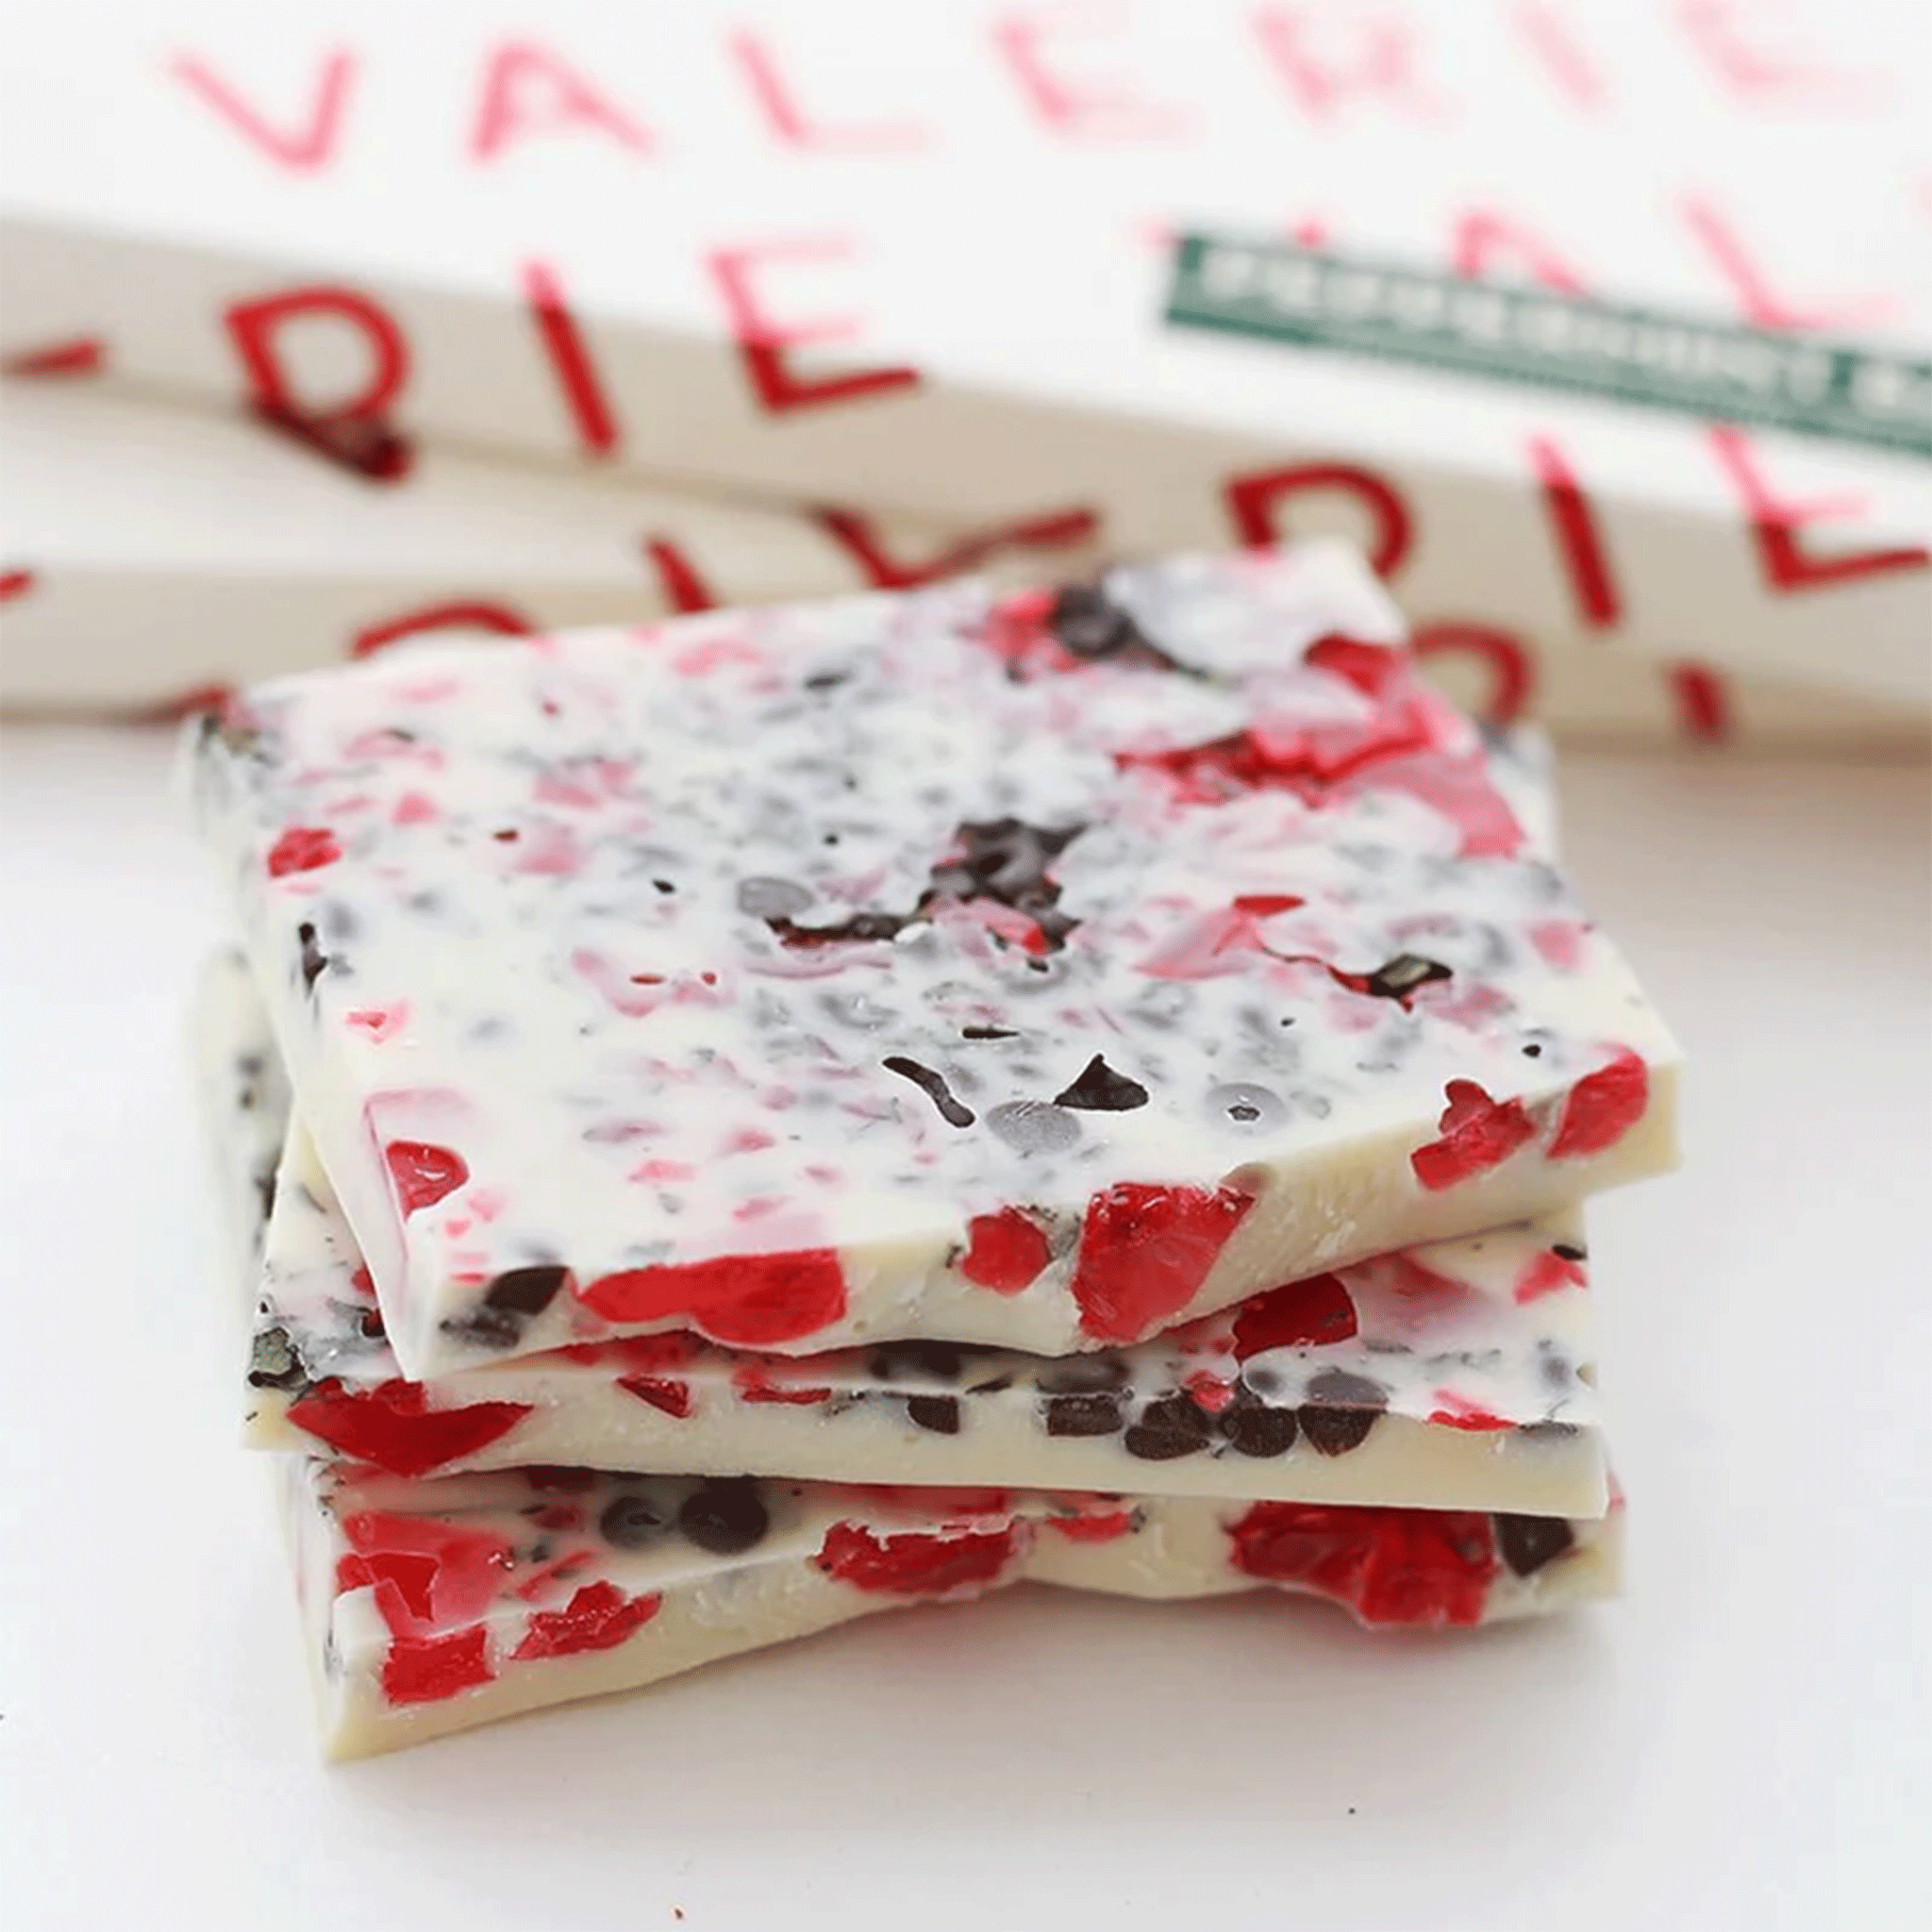 The white chocolate bar broken up to see the inside with pieces of peppermint. 